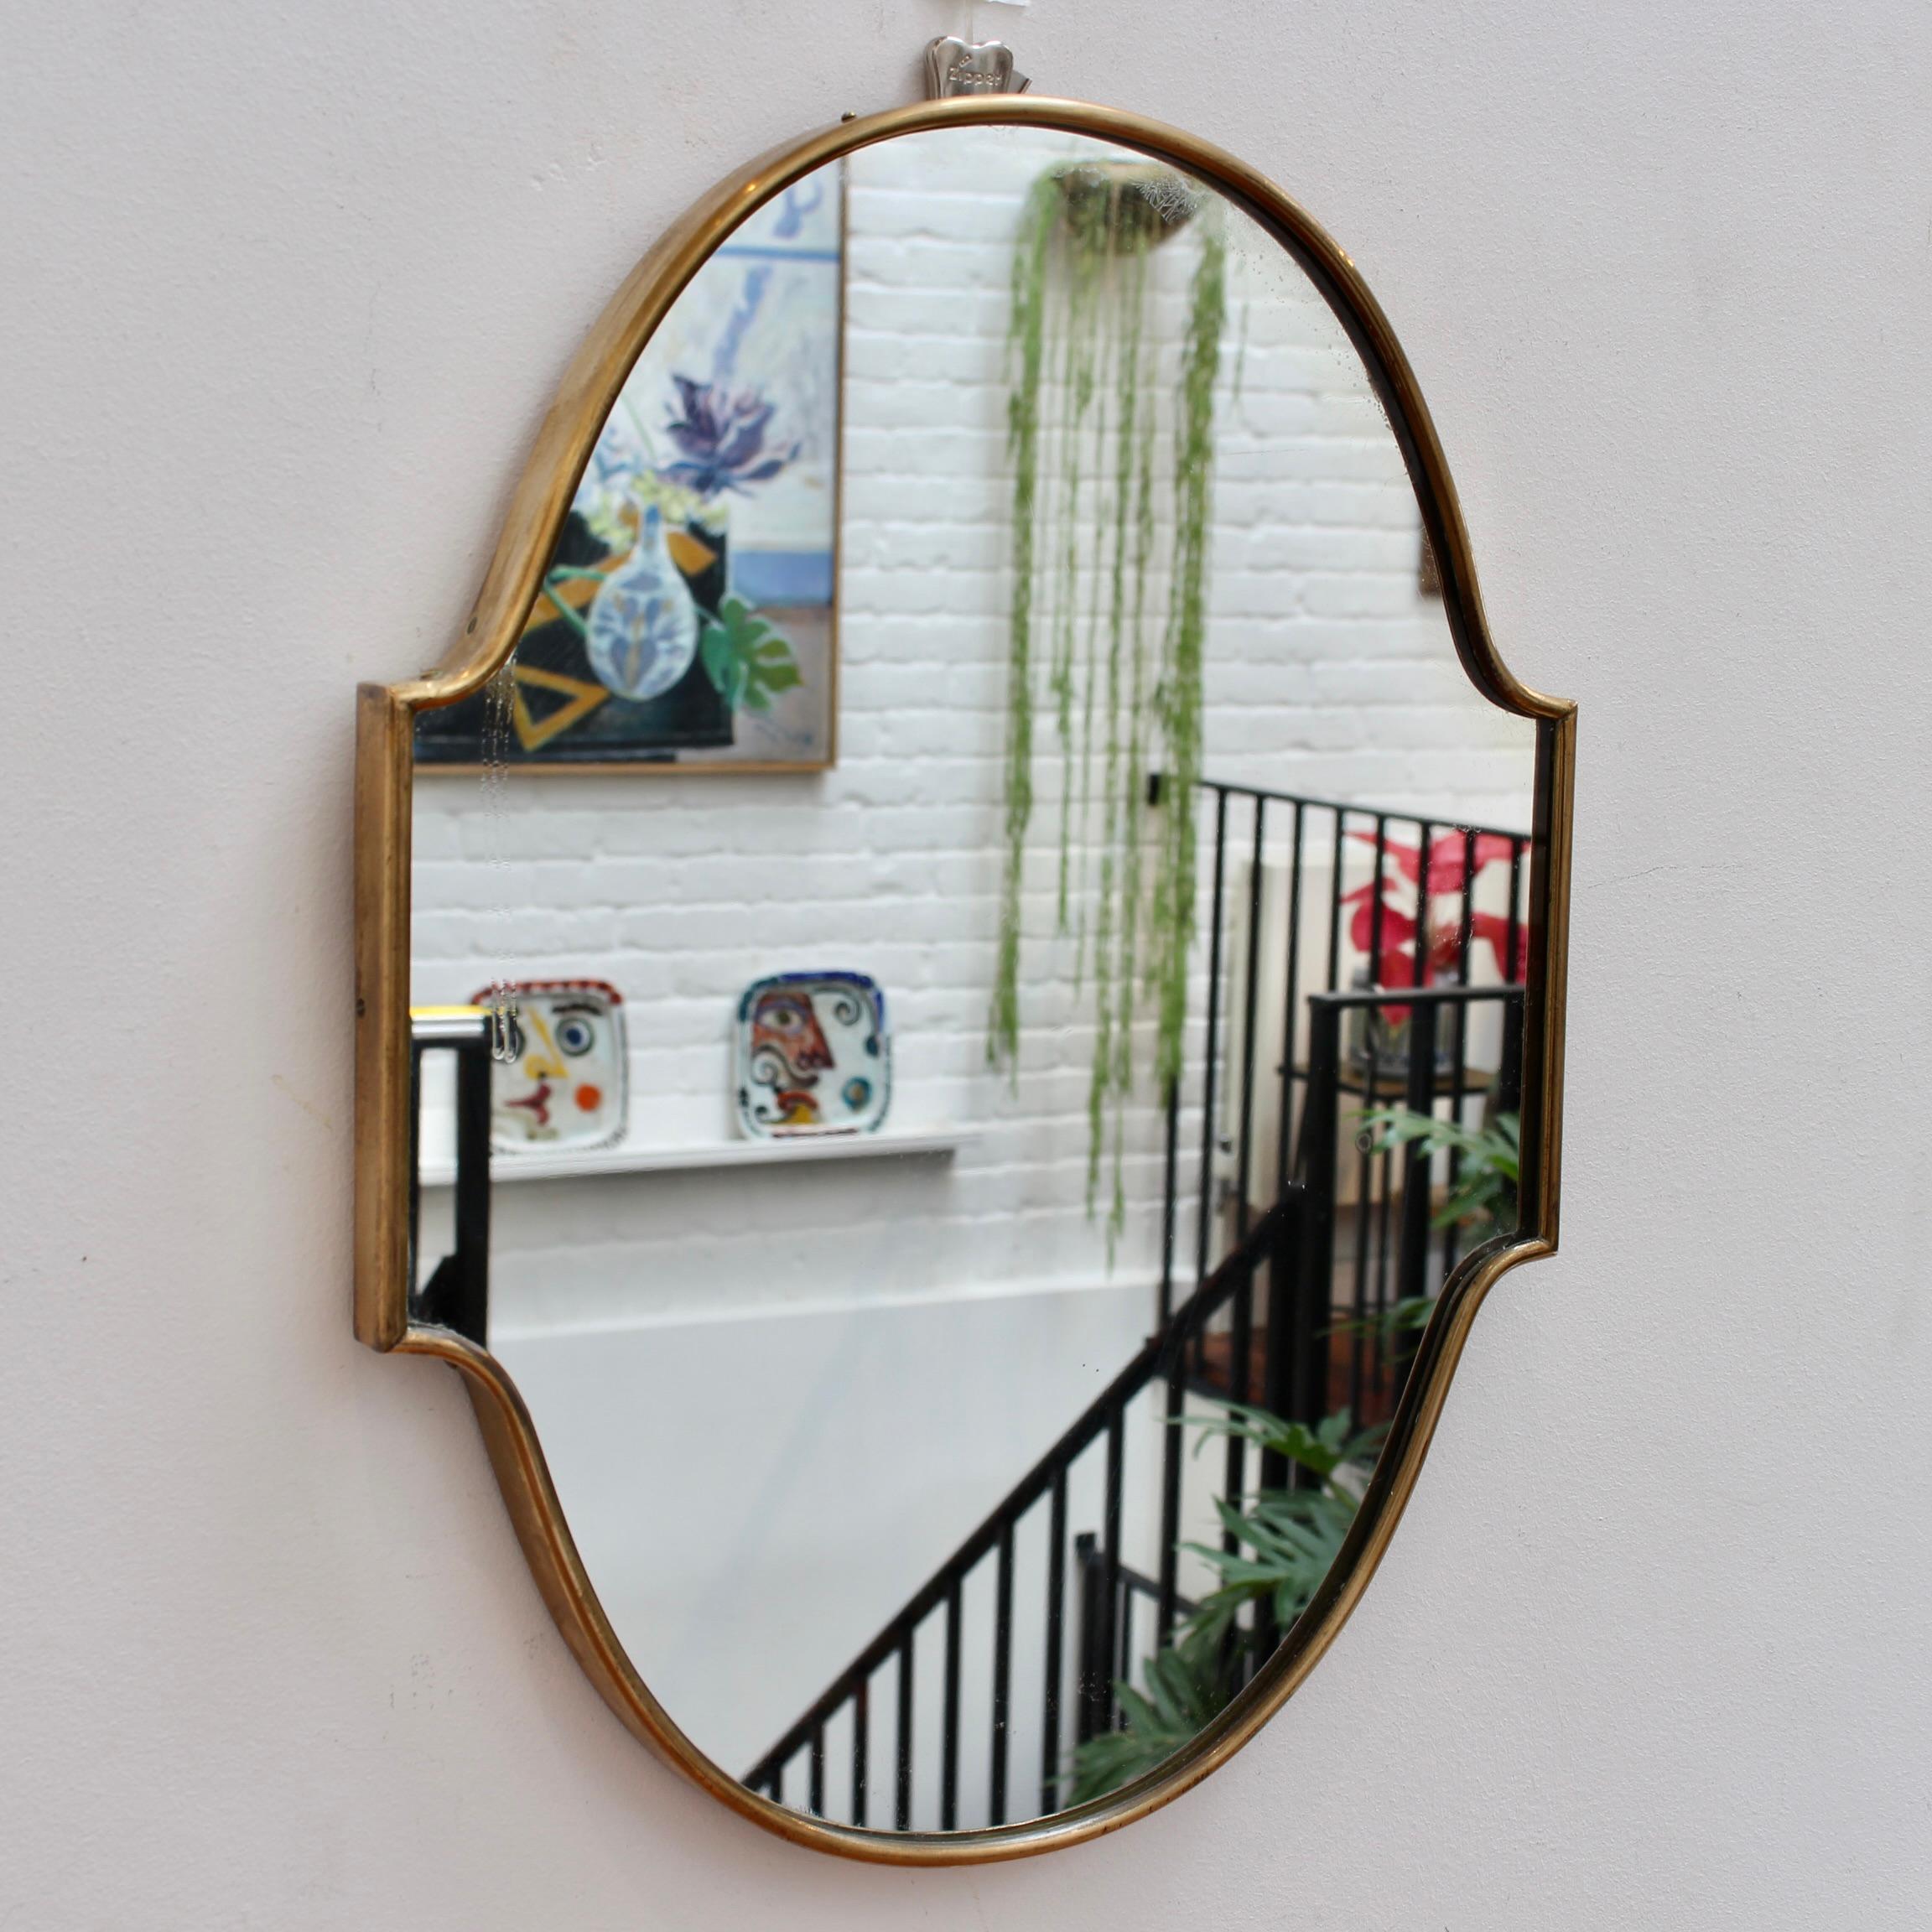 Small-scale midcentury Italian wall mirror with brass frame (circa 1950s). The mirror is oval-shaped with 'ears' on each side. It is classically elegant and distinctive in a modern Gio Ponti style. The mirror is in overall good condition with some